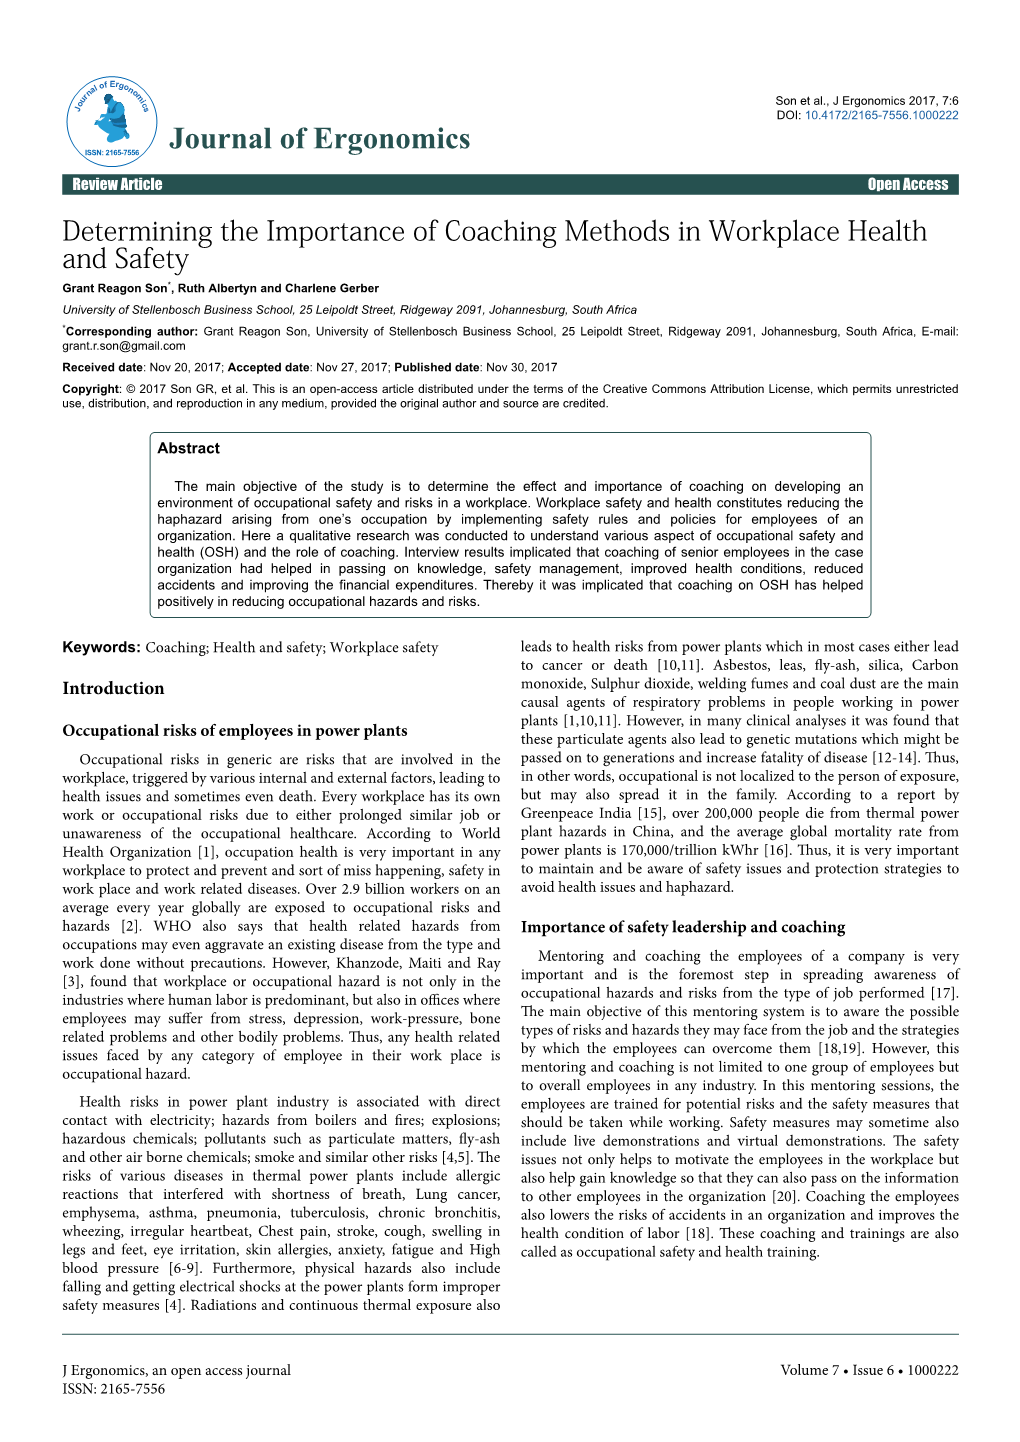 Determining the Importance of Coaching Methods in Workplace